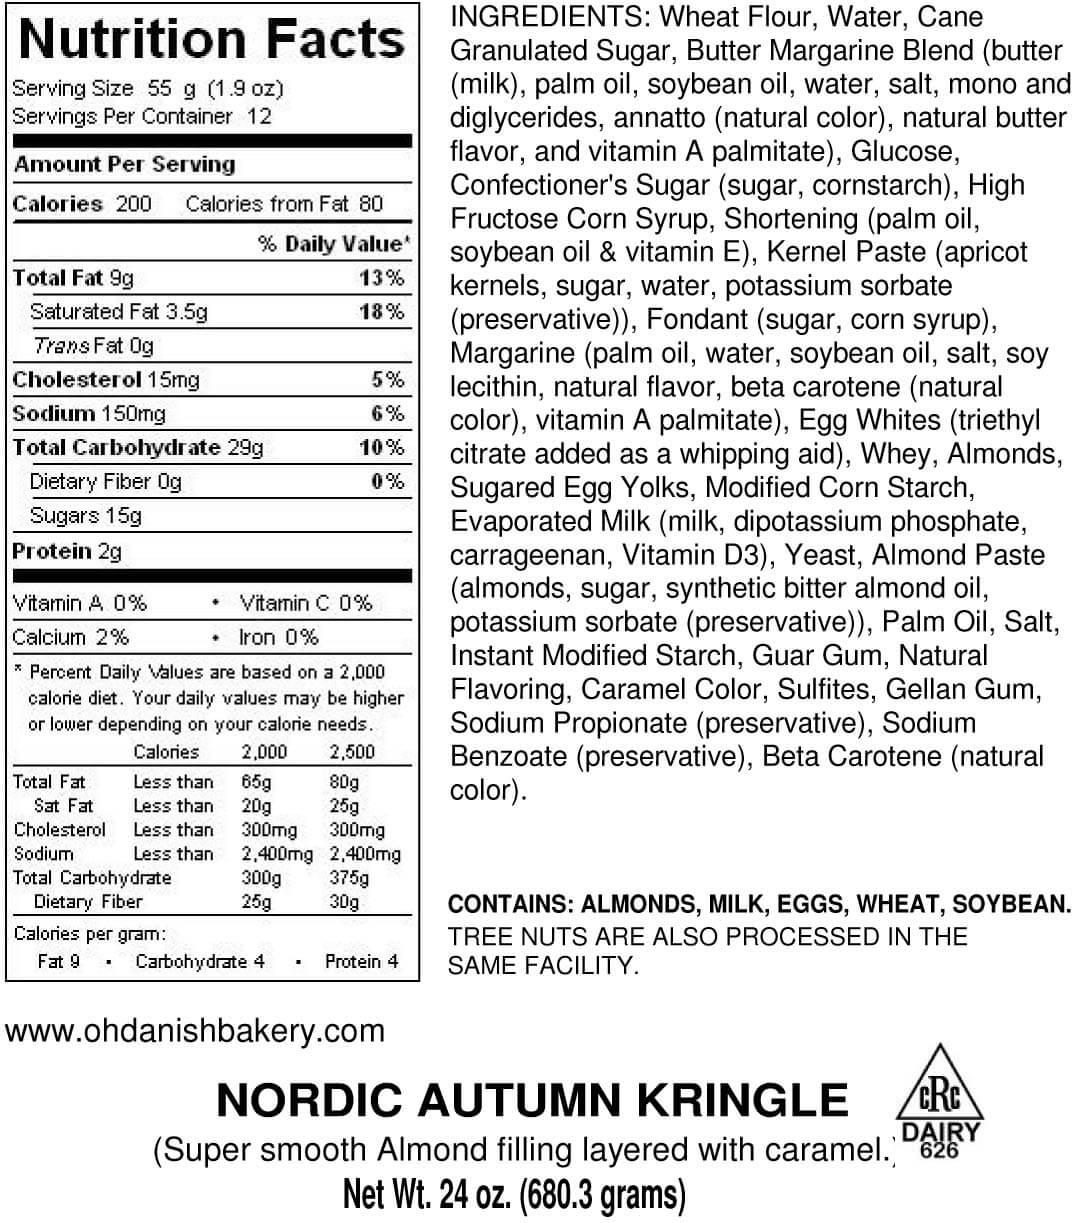 Nutritional Label for Nordic Autumn Kringle